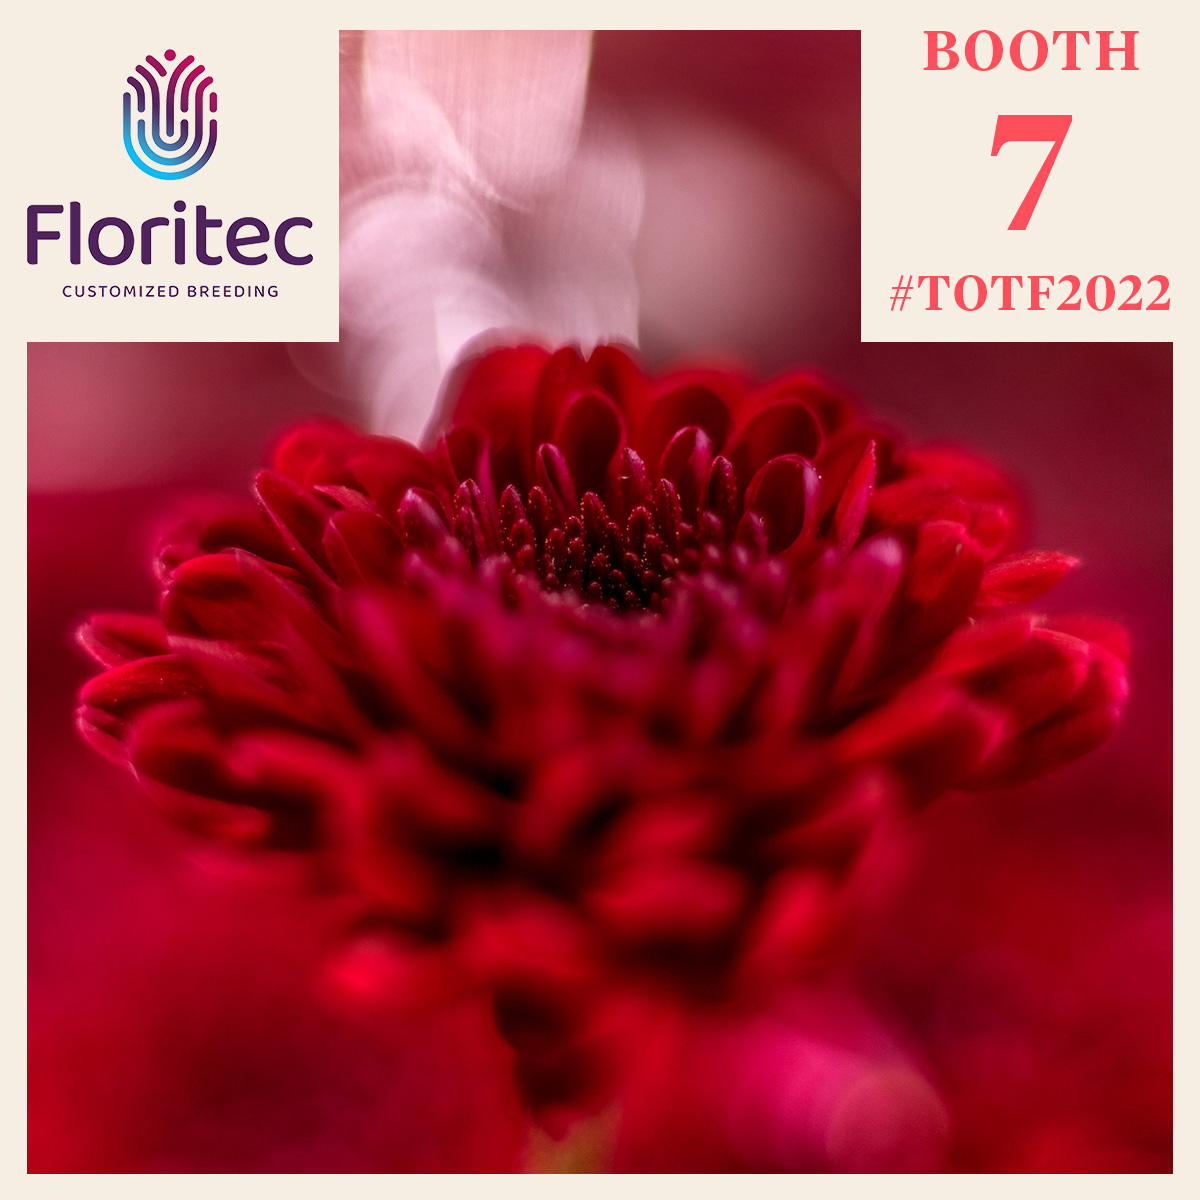 totf2022-we-floritec-passion-for-customization-featured